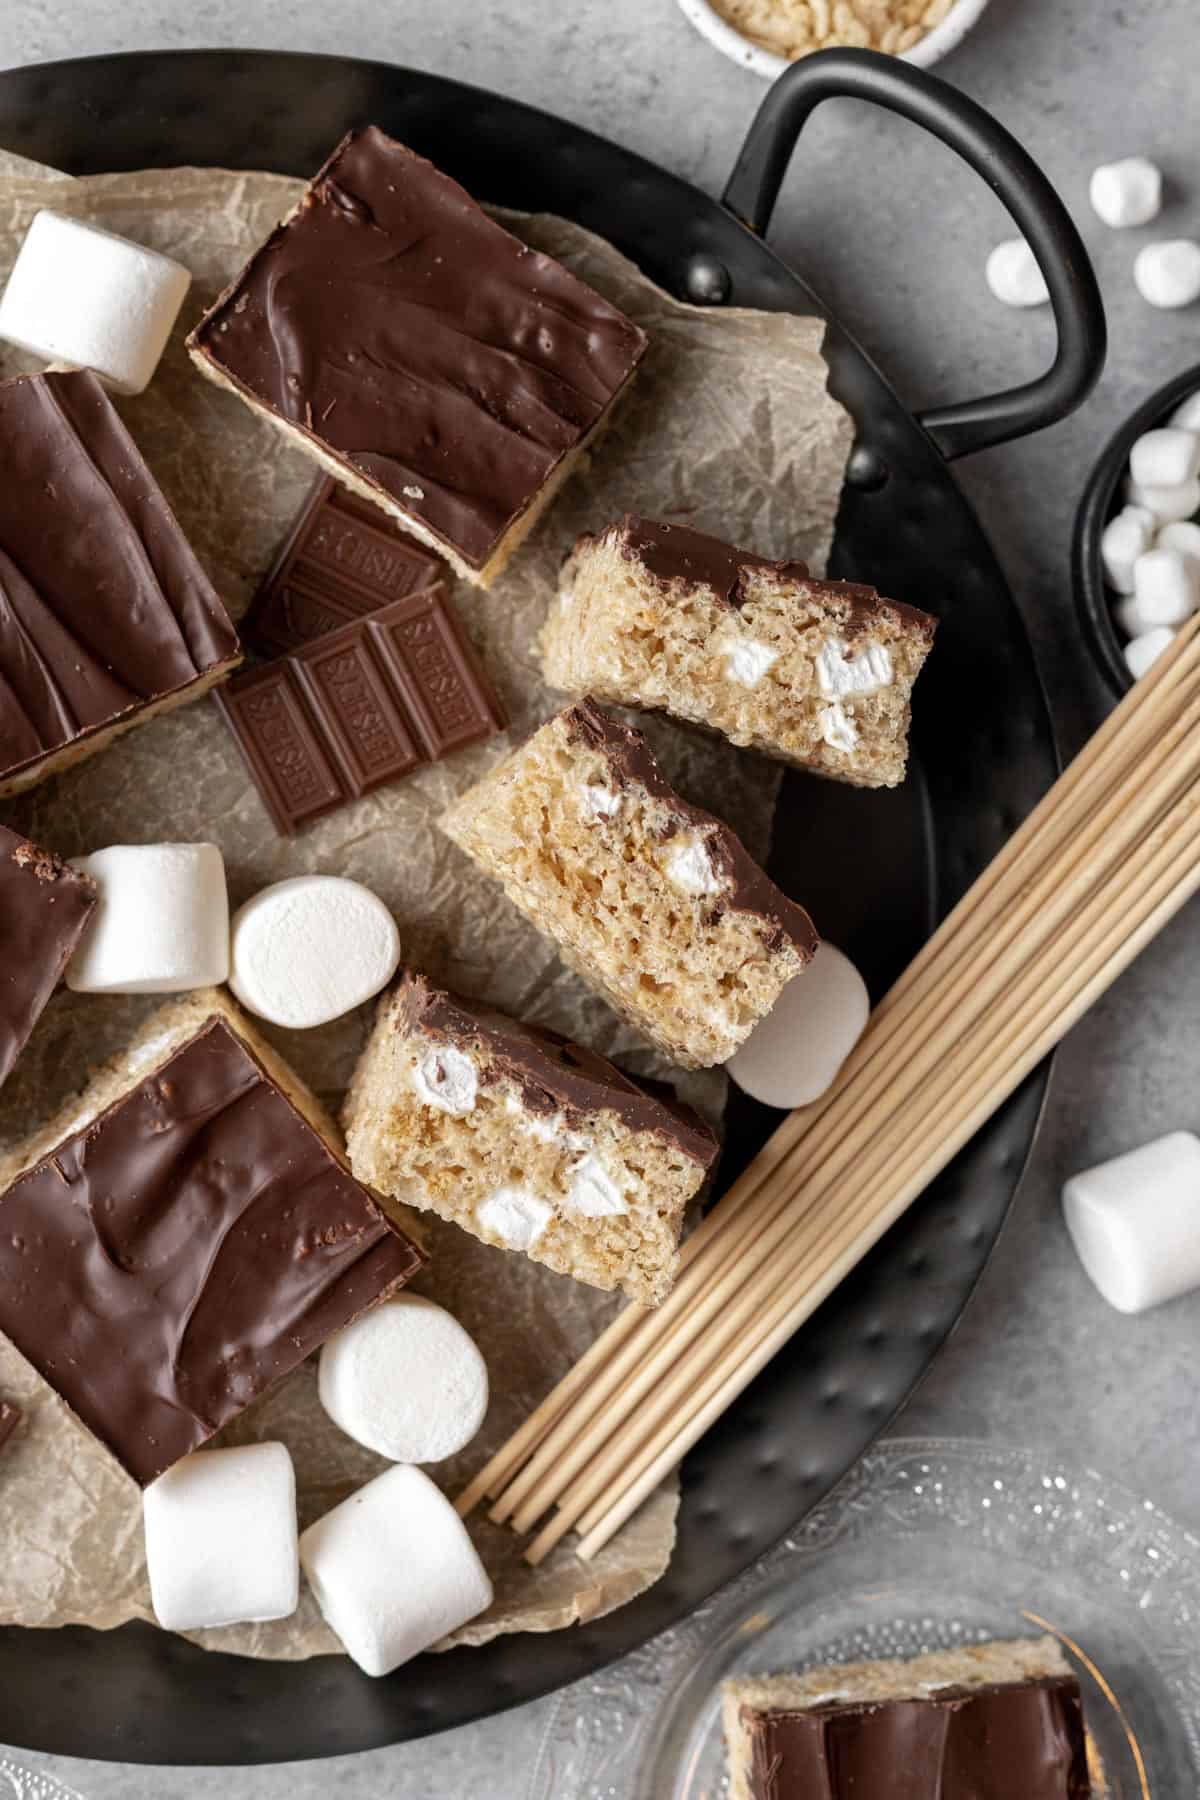 Chocolate covered smores rice krispie treats on their side to show graham crackers and marshmallows mixed in.